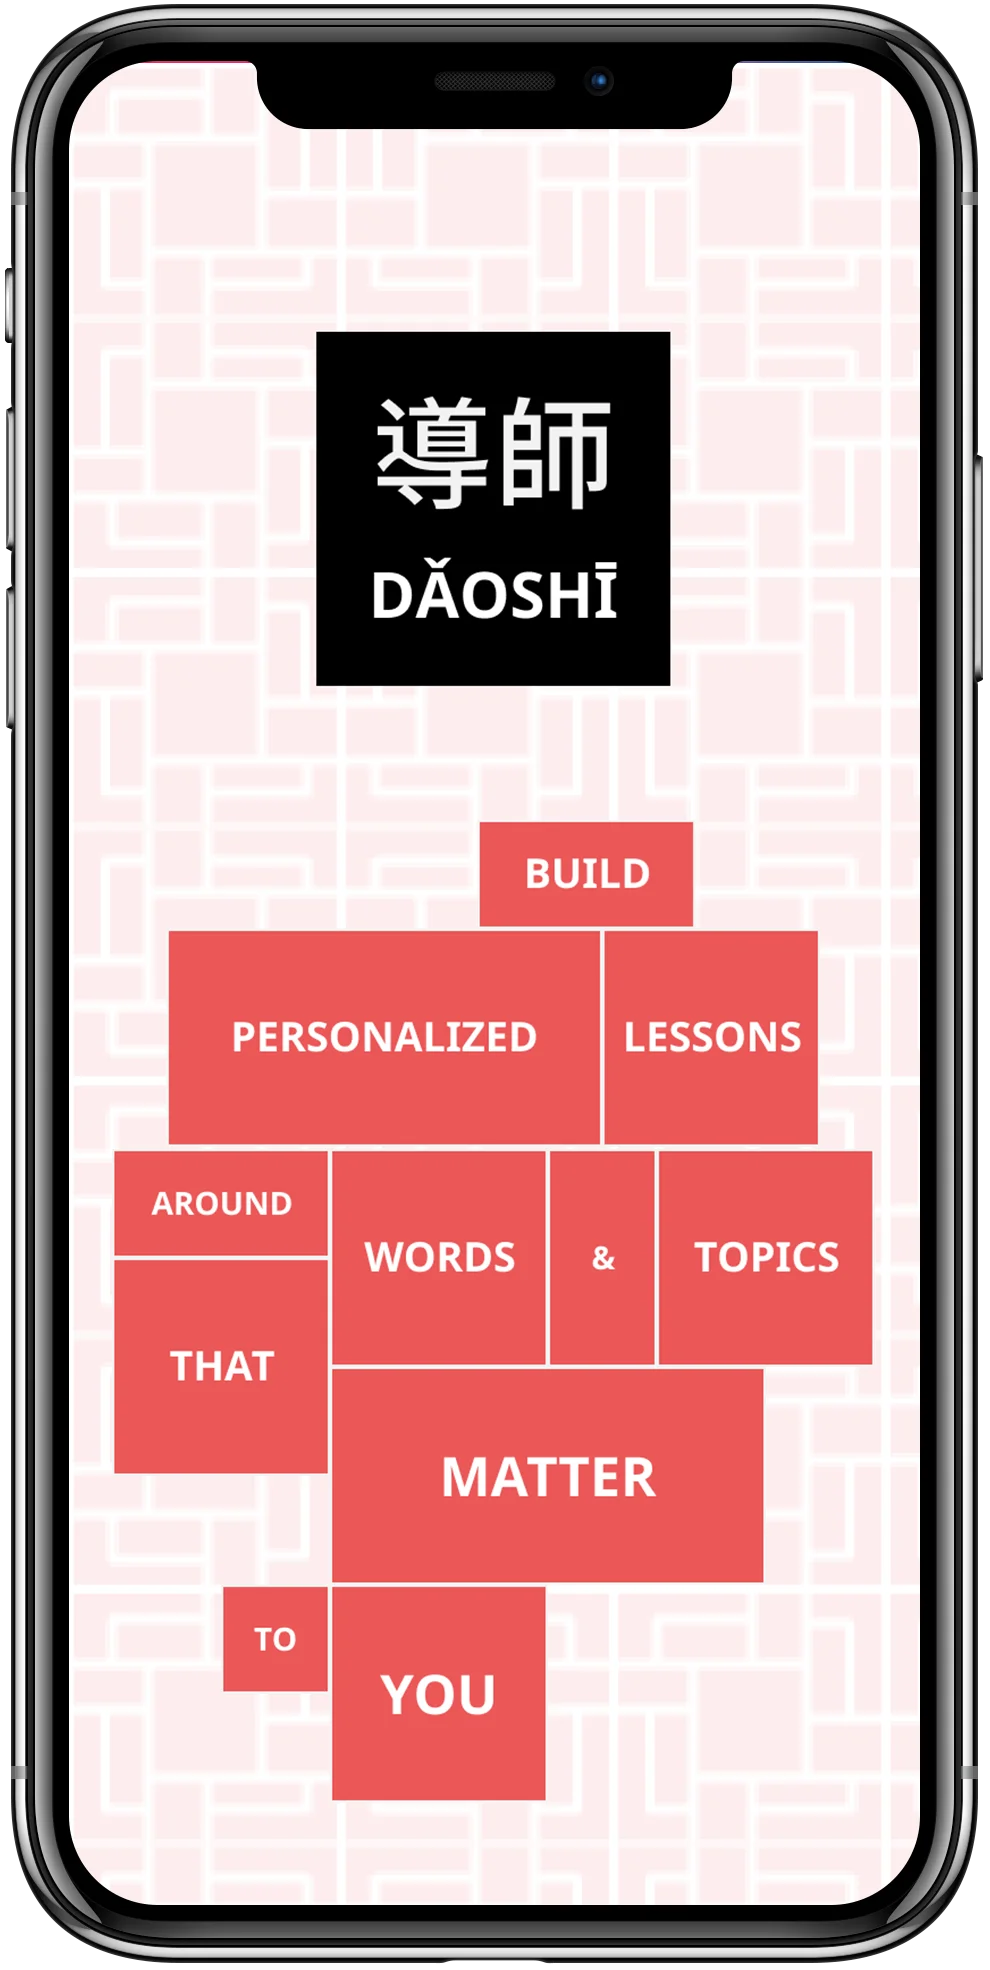 Splash screen with blurb: Build Personalized Lessons Around Words & Topics That Matter To You.